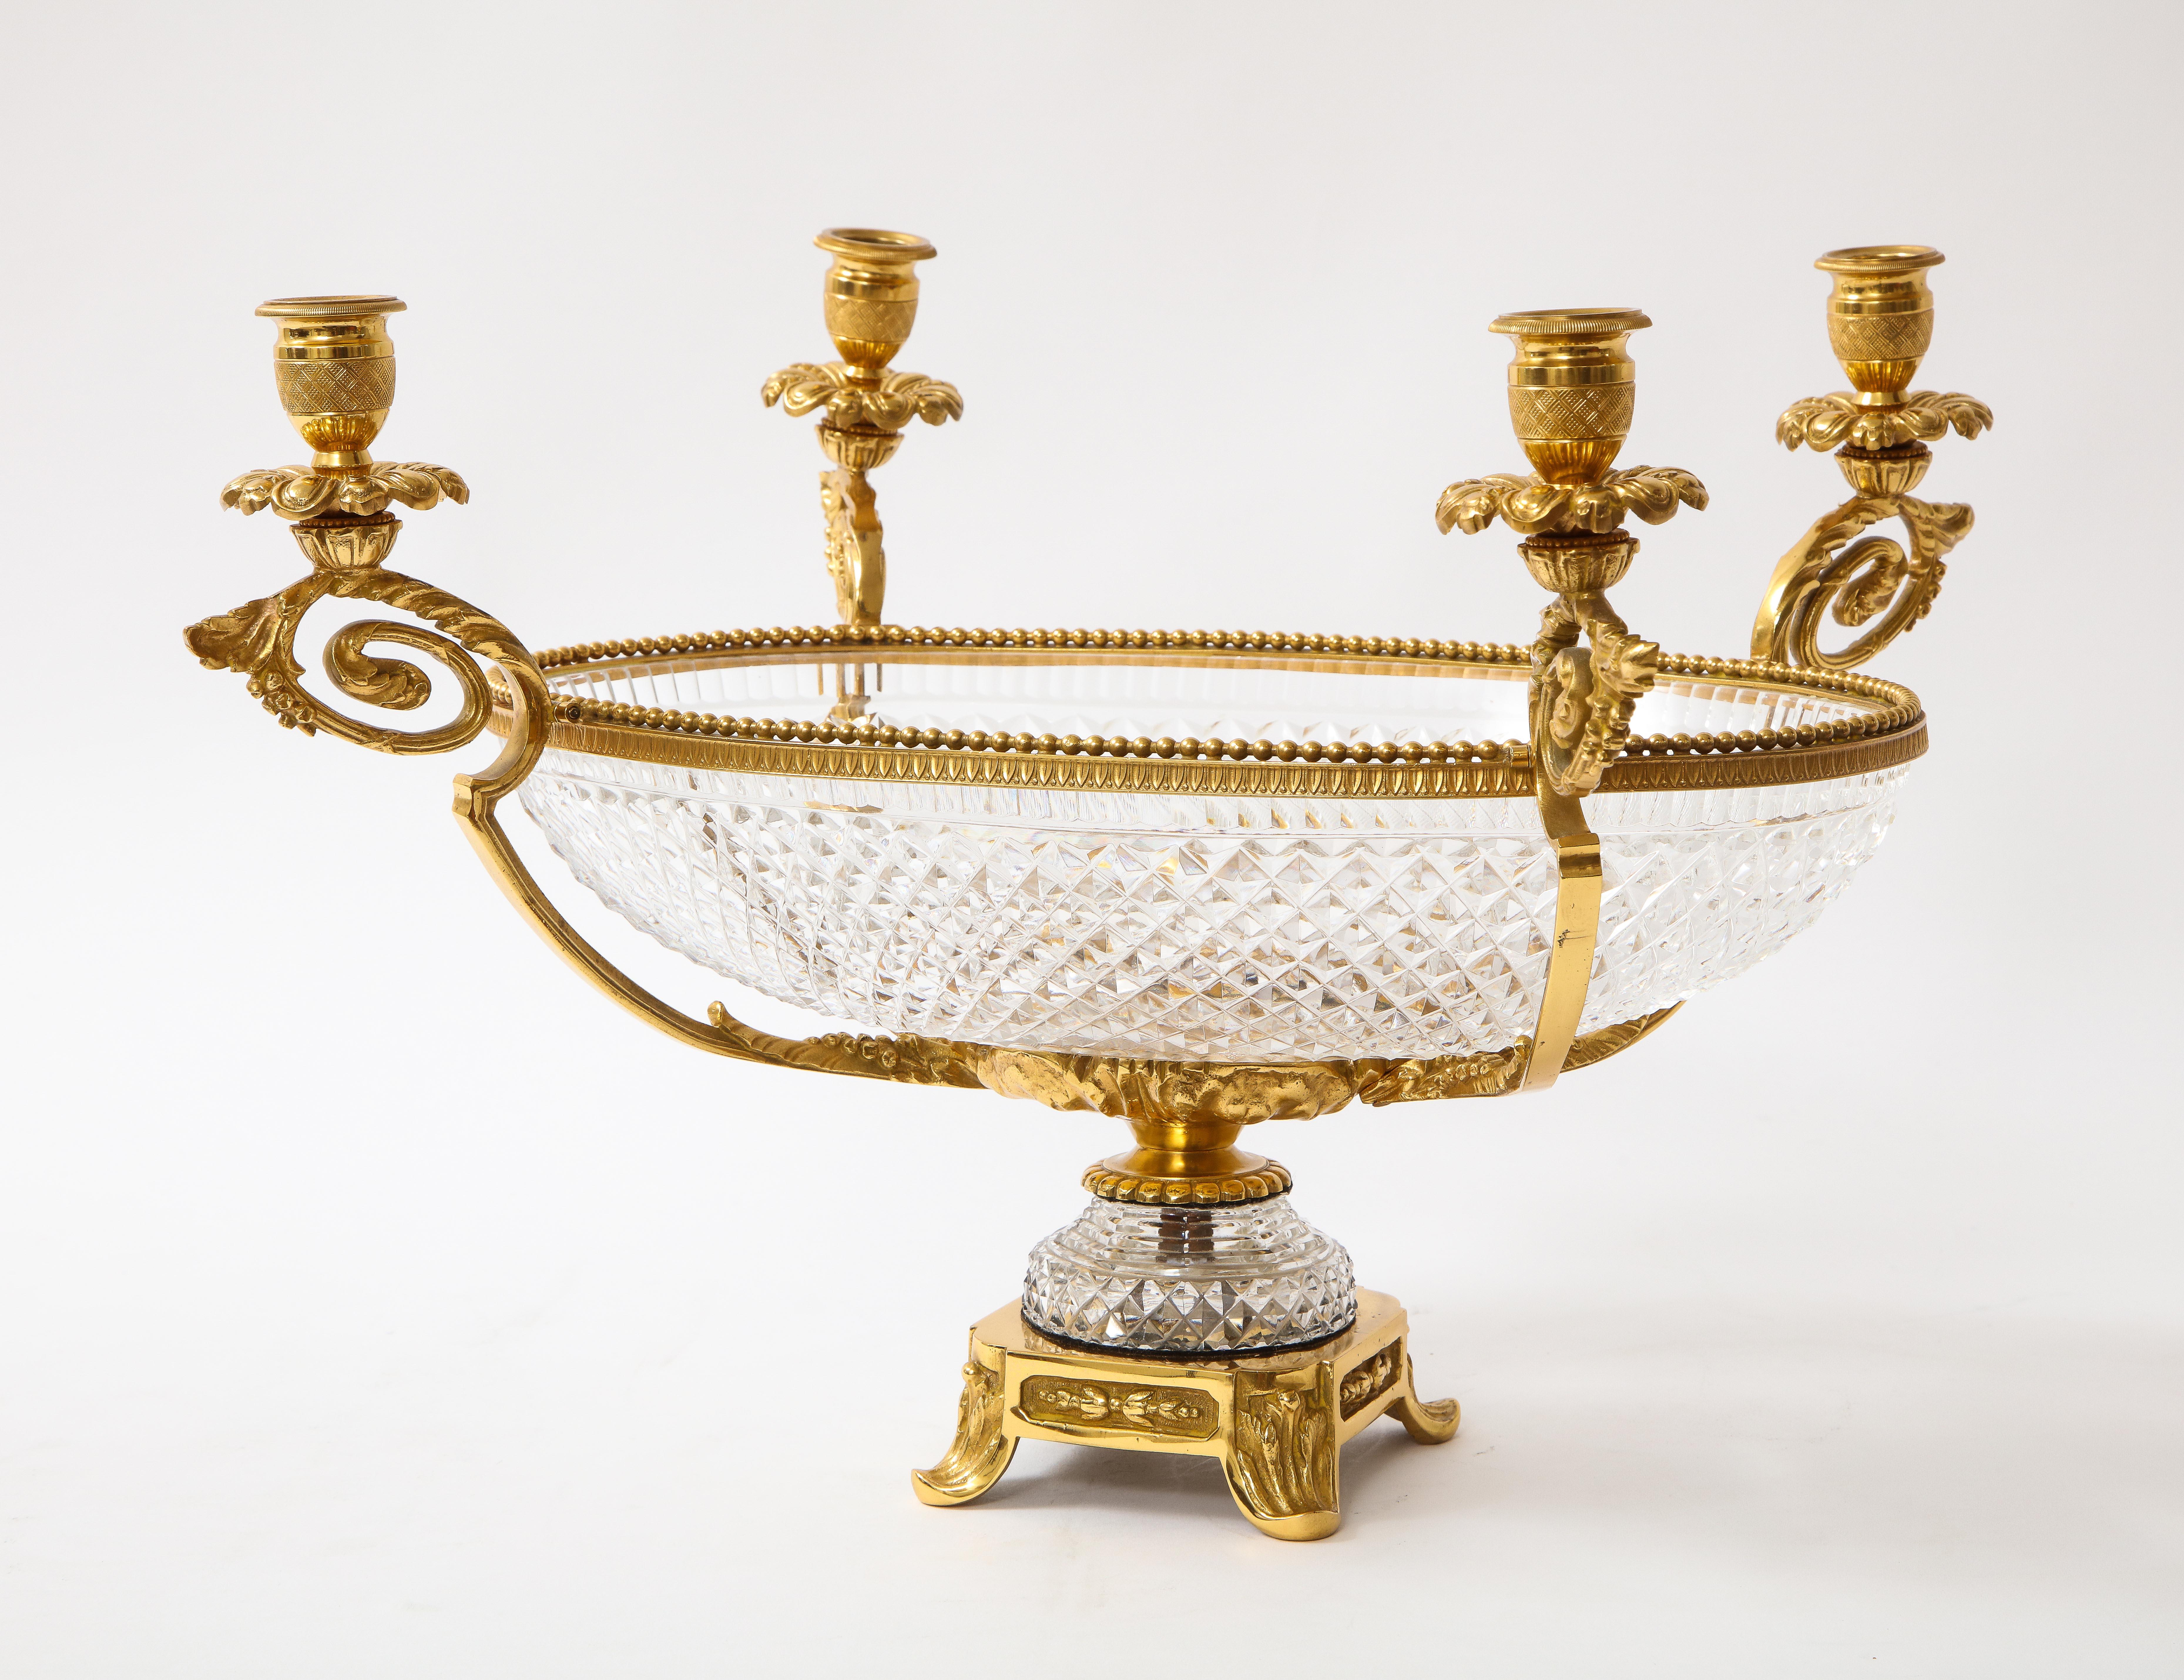 An unusual 19th century French Baccarat Prismic pattern crystal centerpiece and four-light dore bronze candelabra set. The centerpiece bowl is French Baccarat crystal, the finest crystal manufacturer in the world. The outside of the bowl is